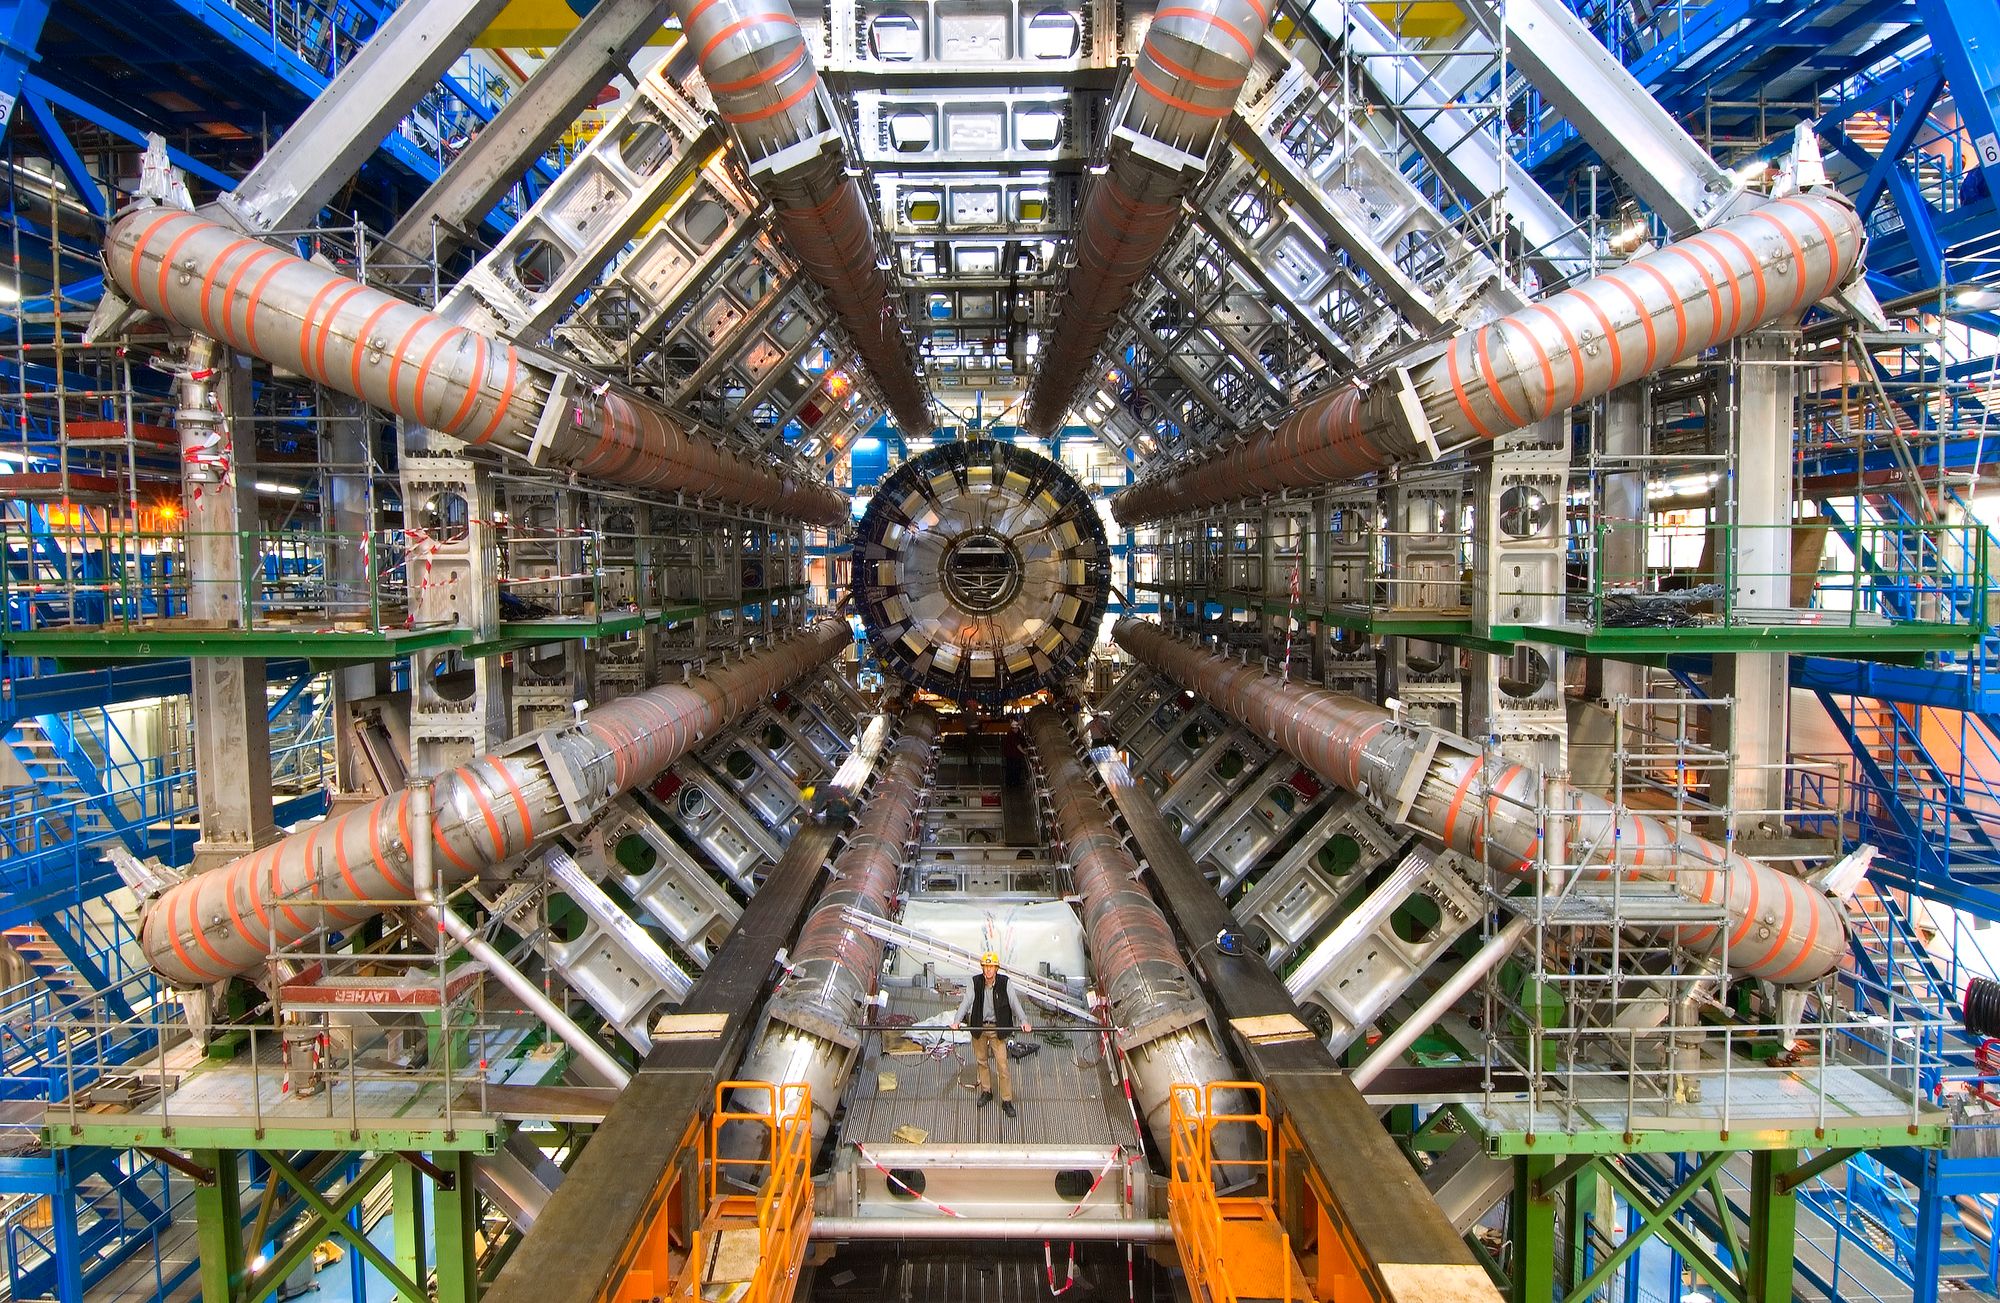 The organizational secrets of the Large Hadron Collider